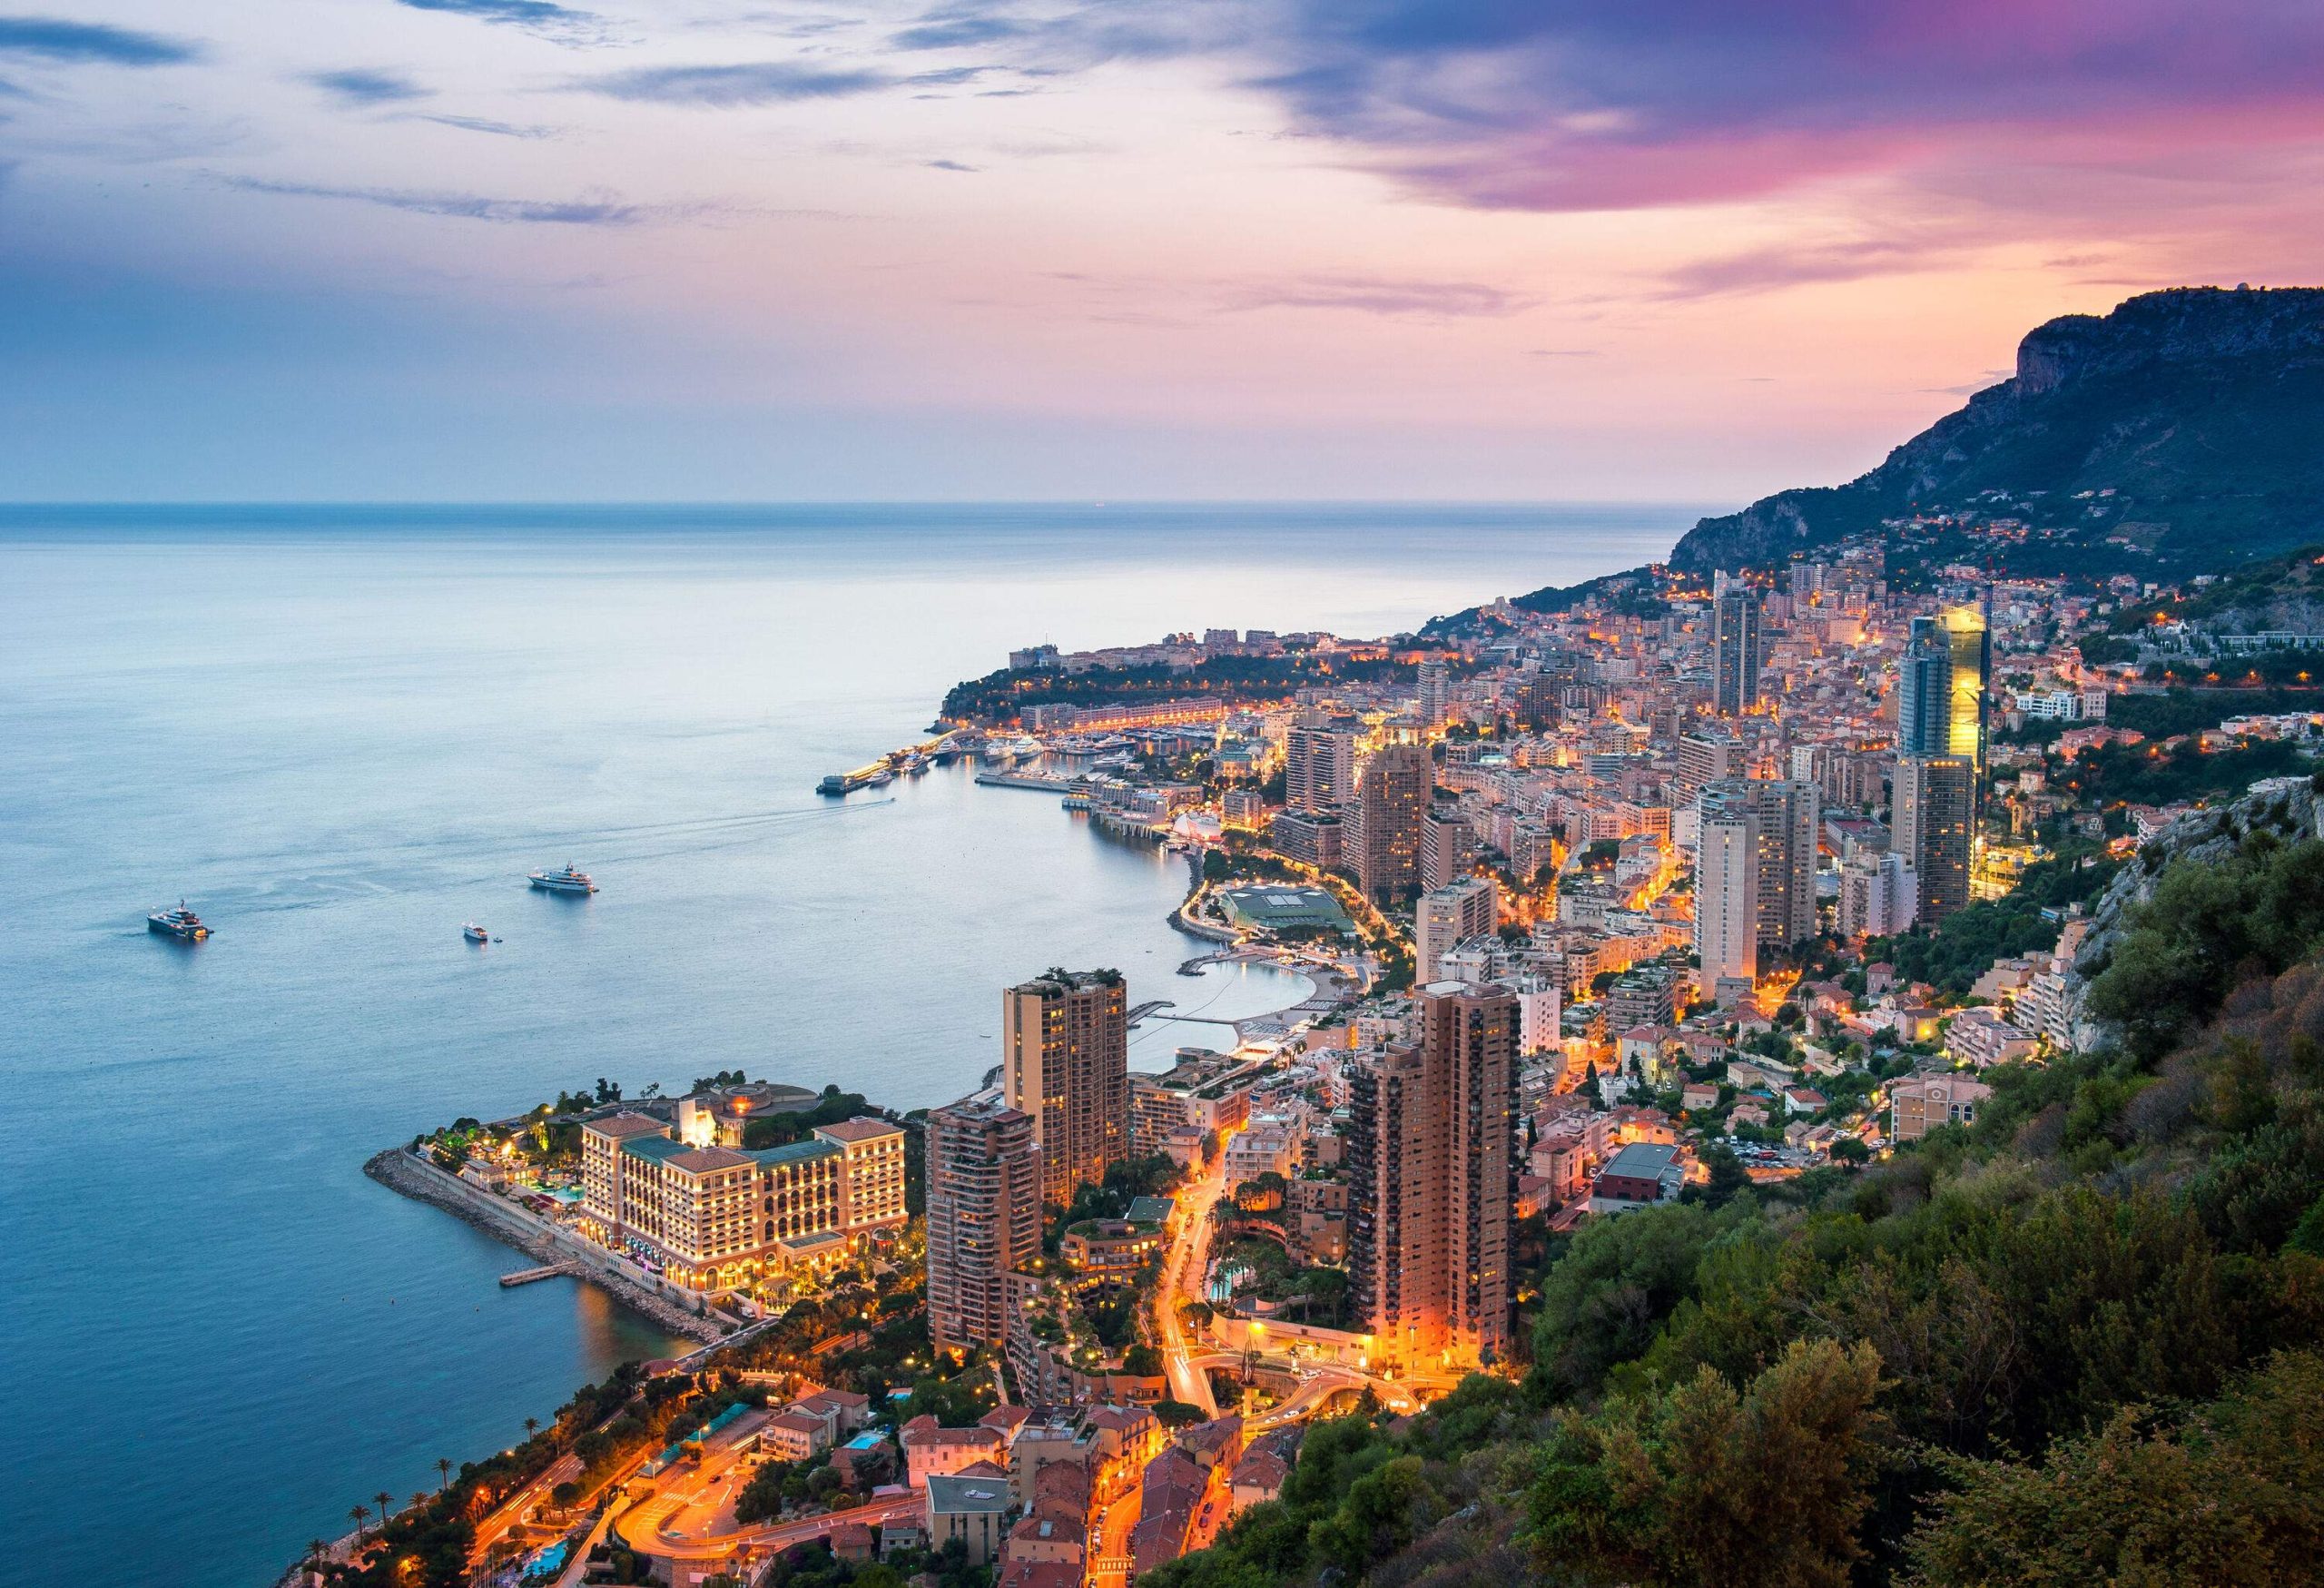 A coastal metropolis comes to life with towering lit skyscrapers as a gorgeous sunset casts its warm hues over the huge expanse of the sea.